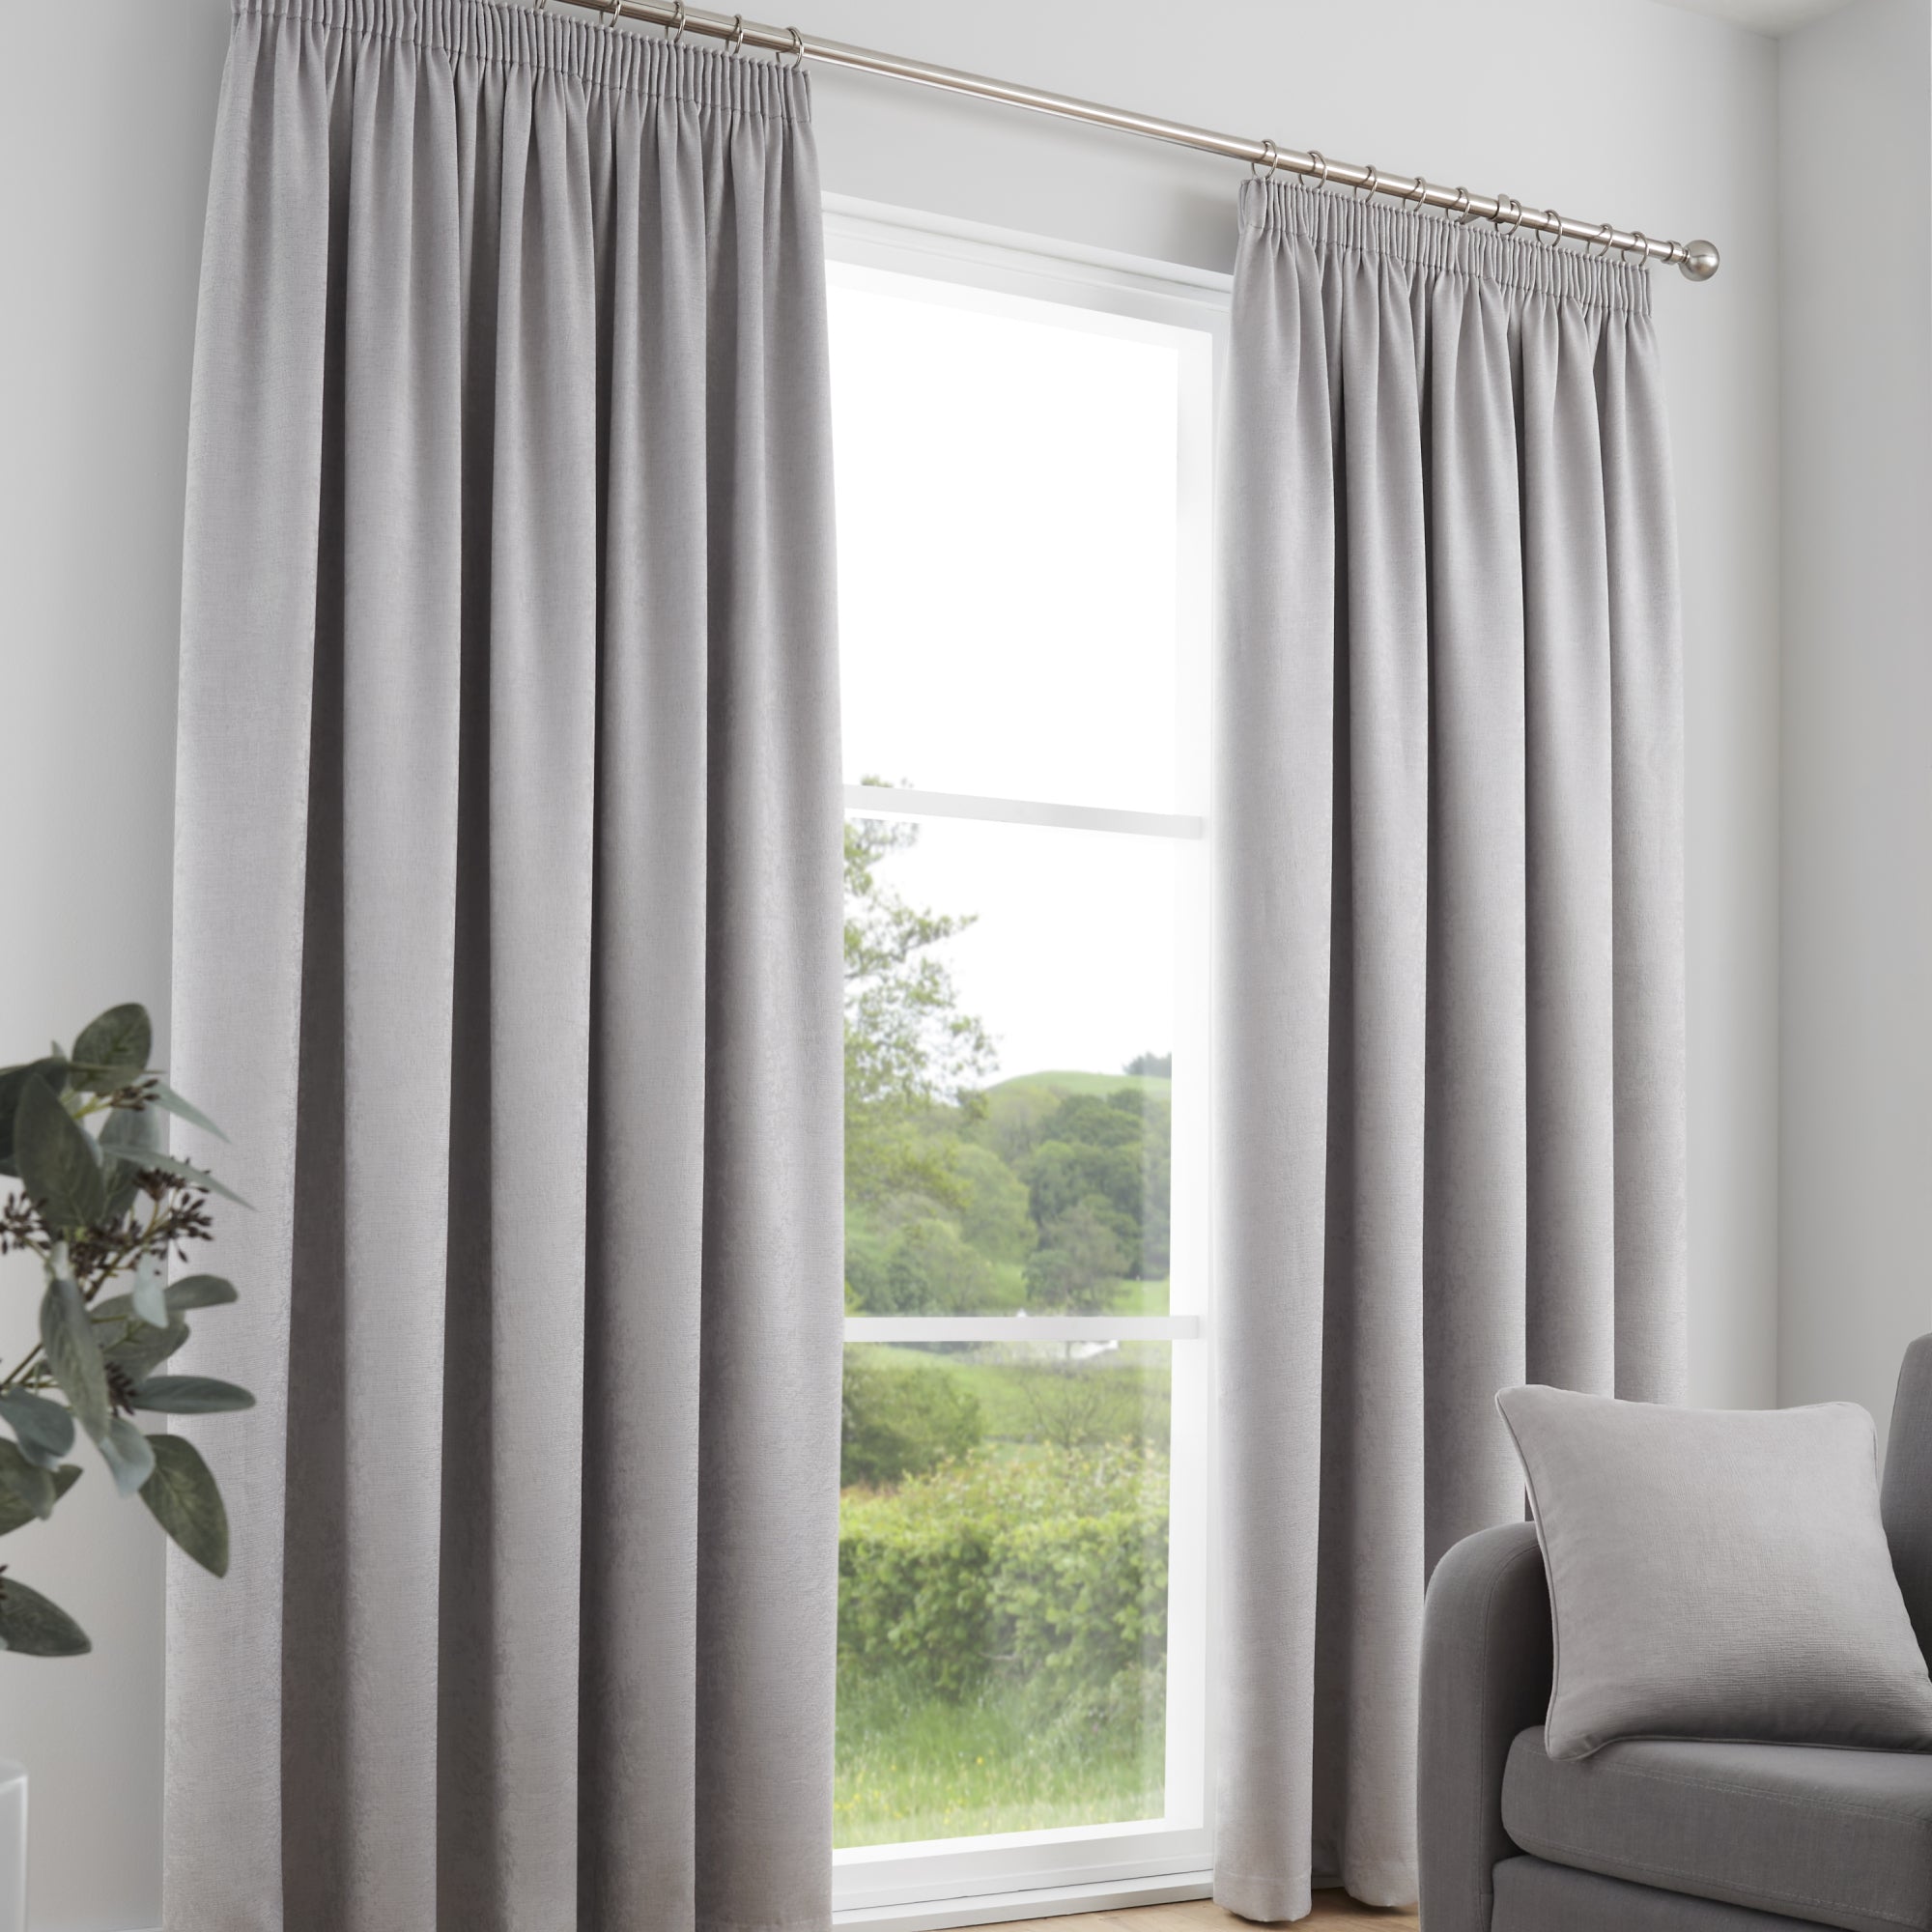 Pair of Pencil Pleat Curtains Galaxy by Fusion in Silver